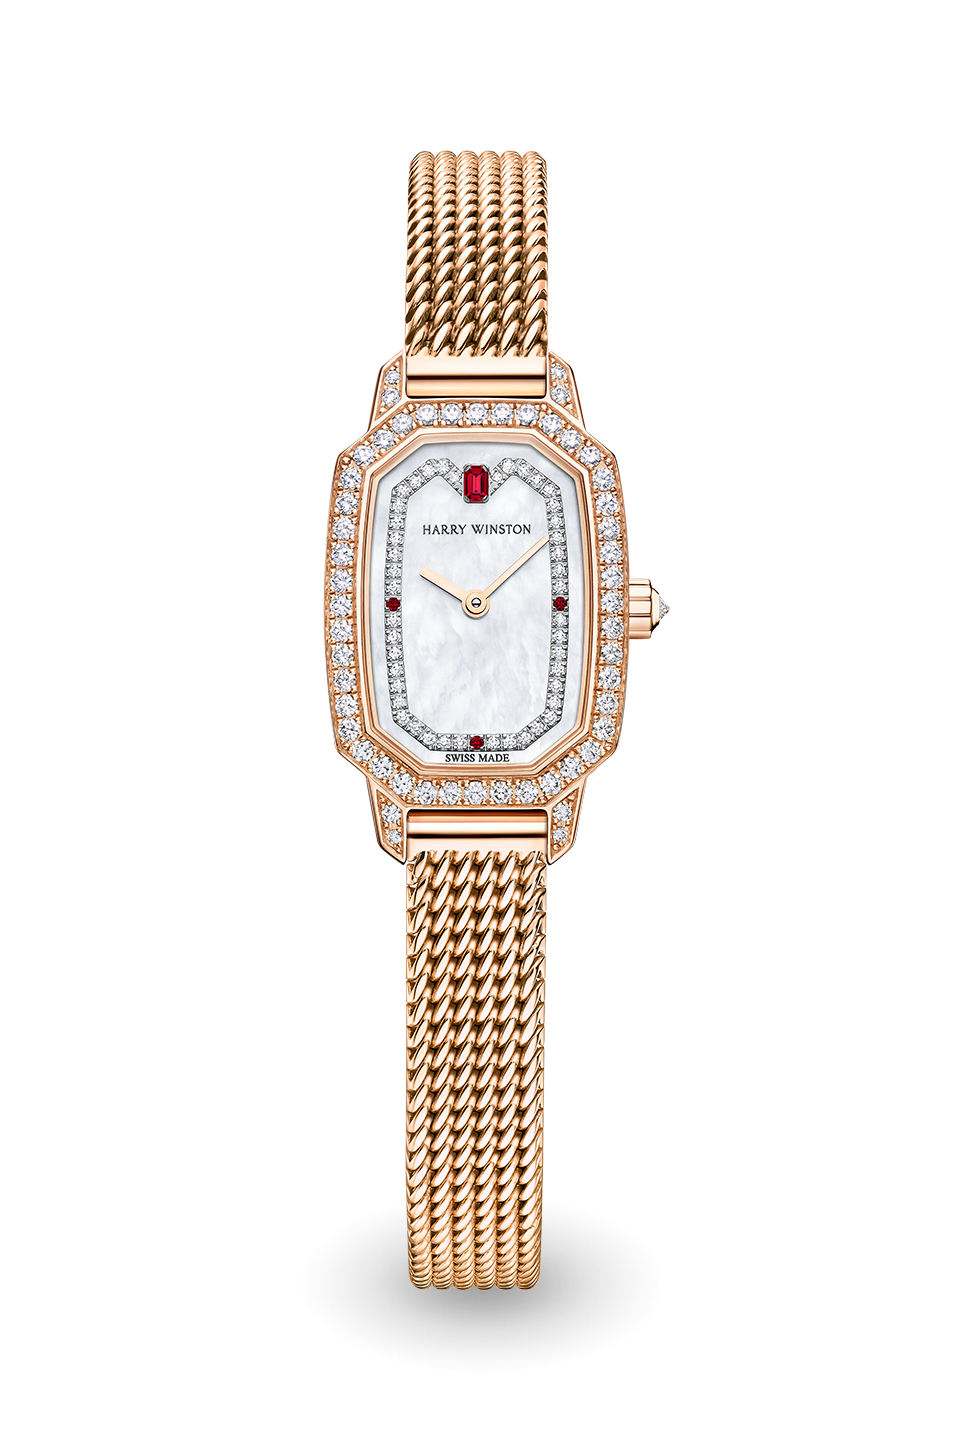 7 Trendy Watches For Women That Are Worth Your Every Penny And You